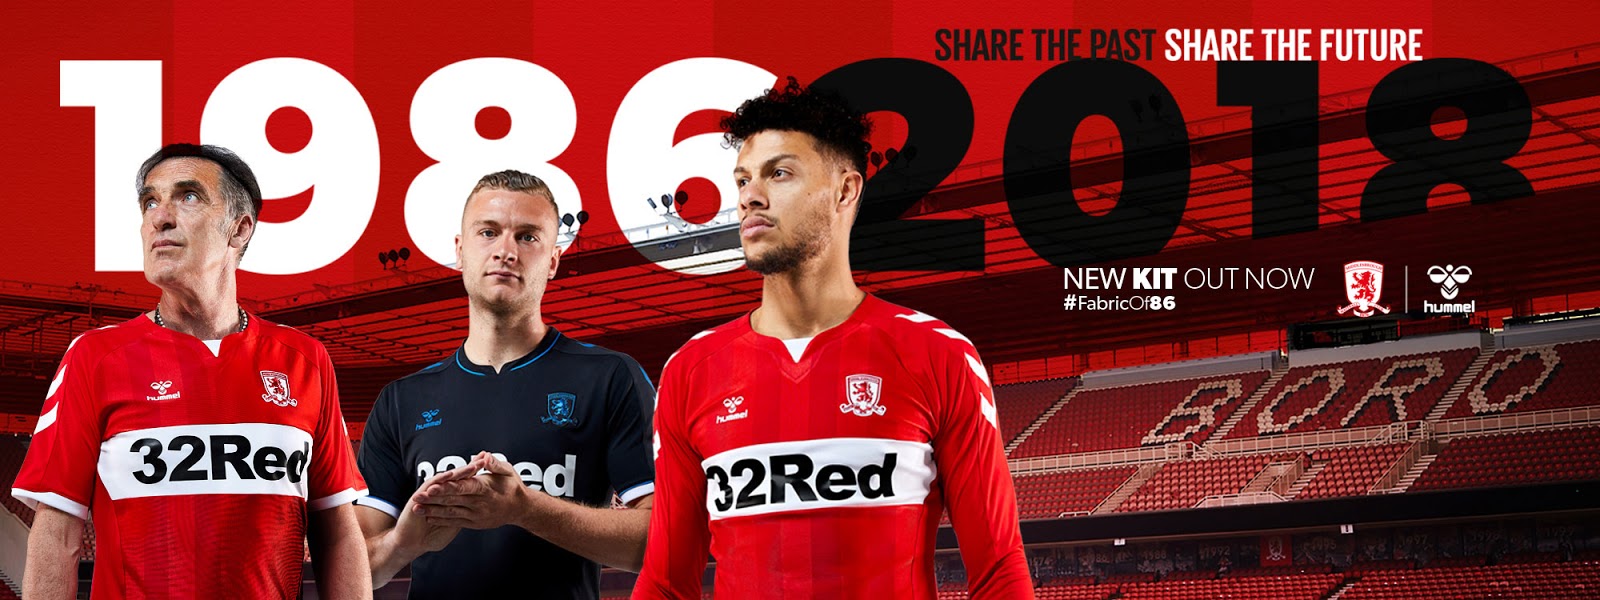 No More Adidas - Hummel Middlesbrough 18-19 Home & Away Kits Released - Footy